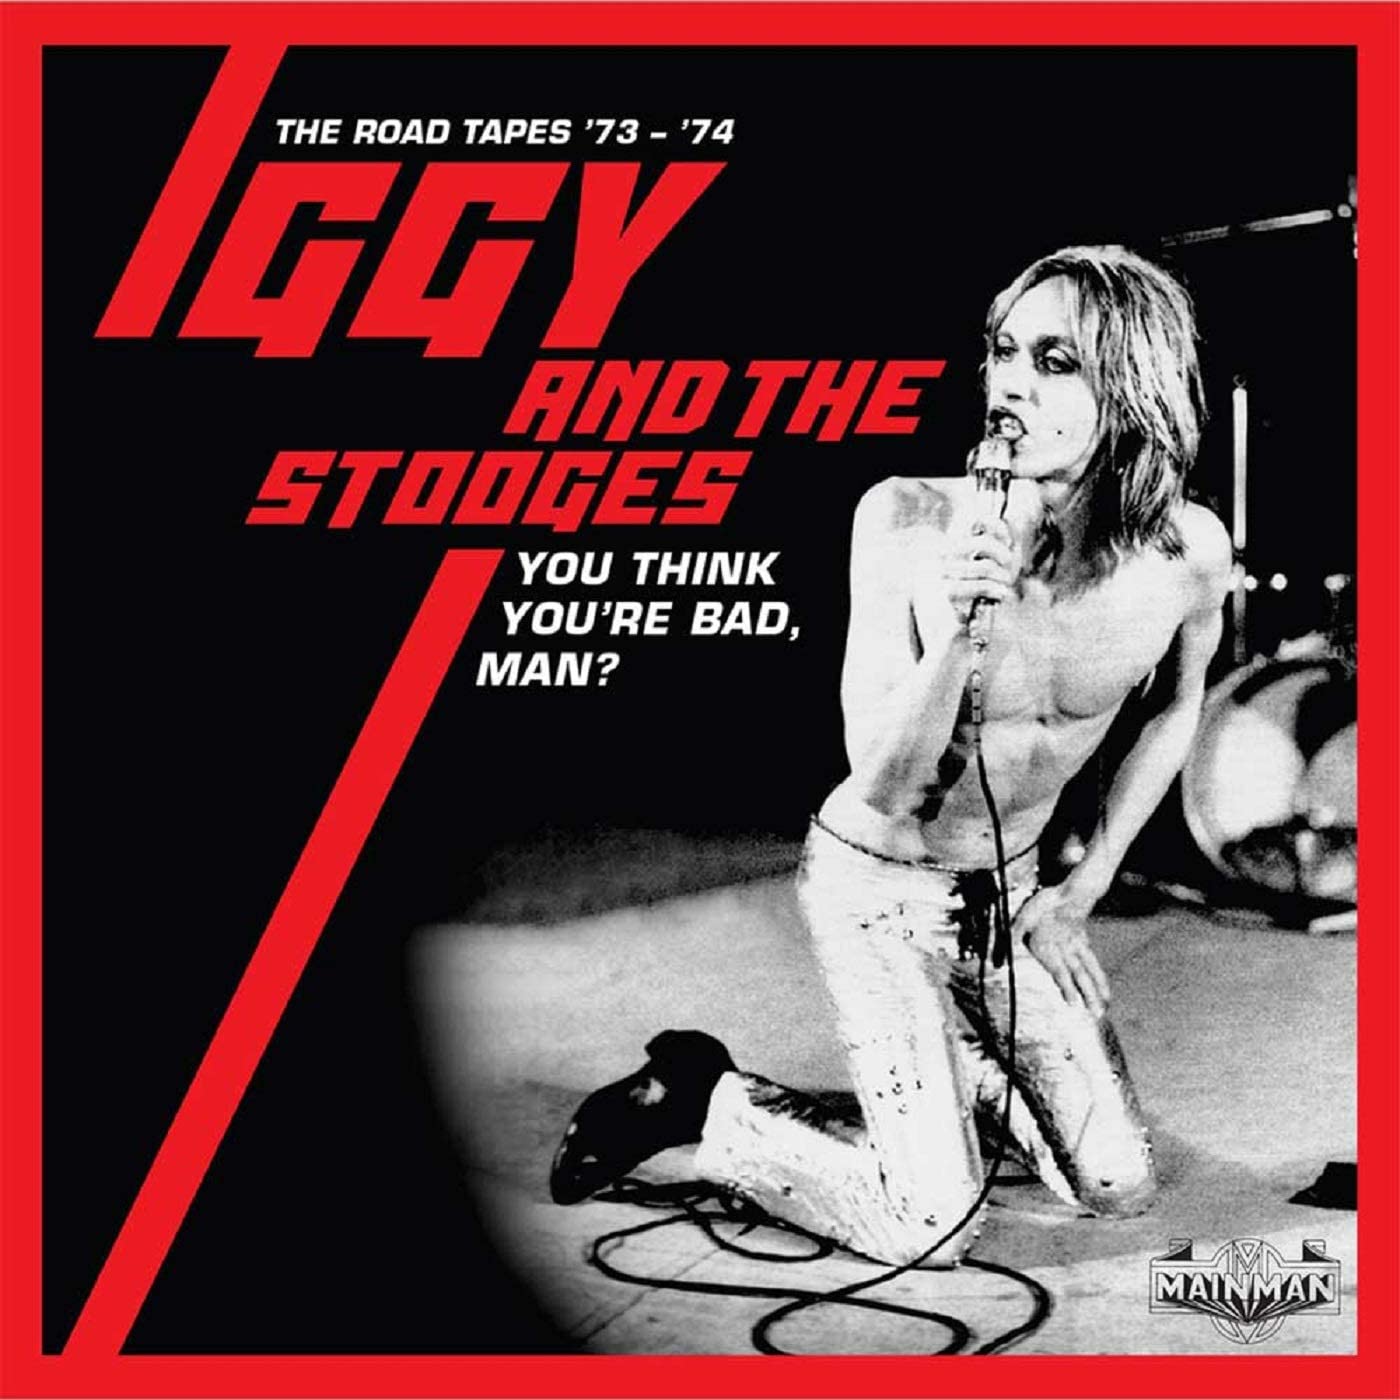 Stooges　Tapes　Road　Iggy　The　Man?:　Bad,　Encore　Think　You　The　Ltd　–　You're　73-74　Records